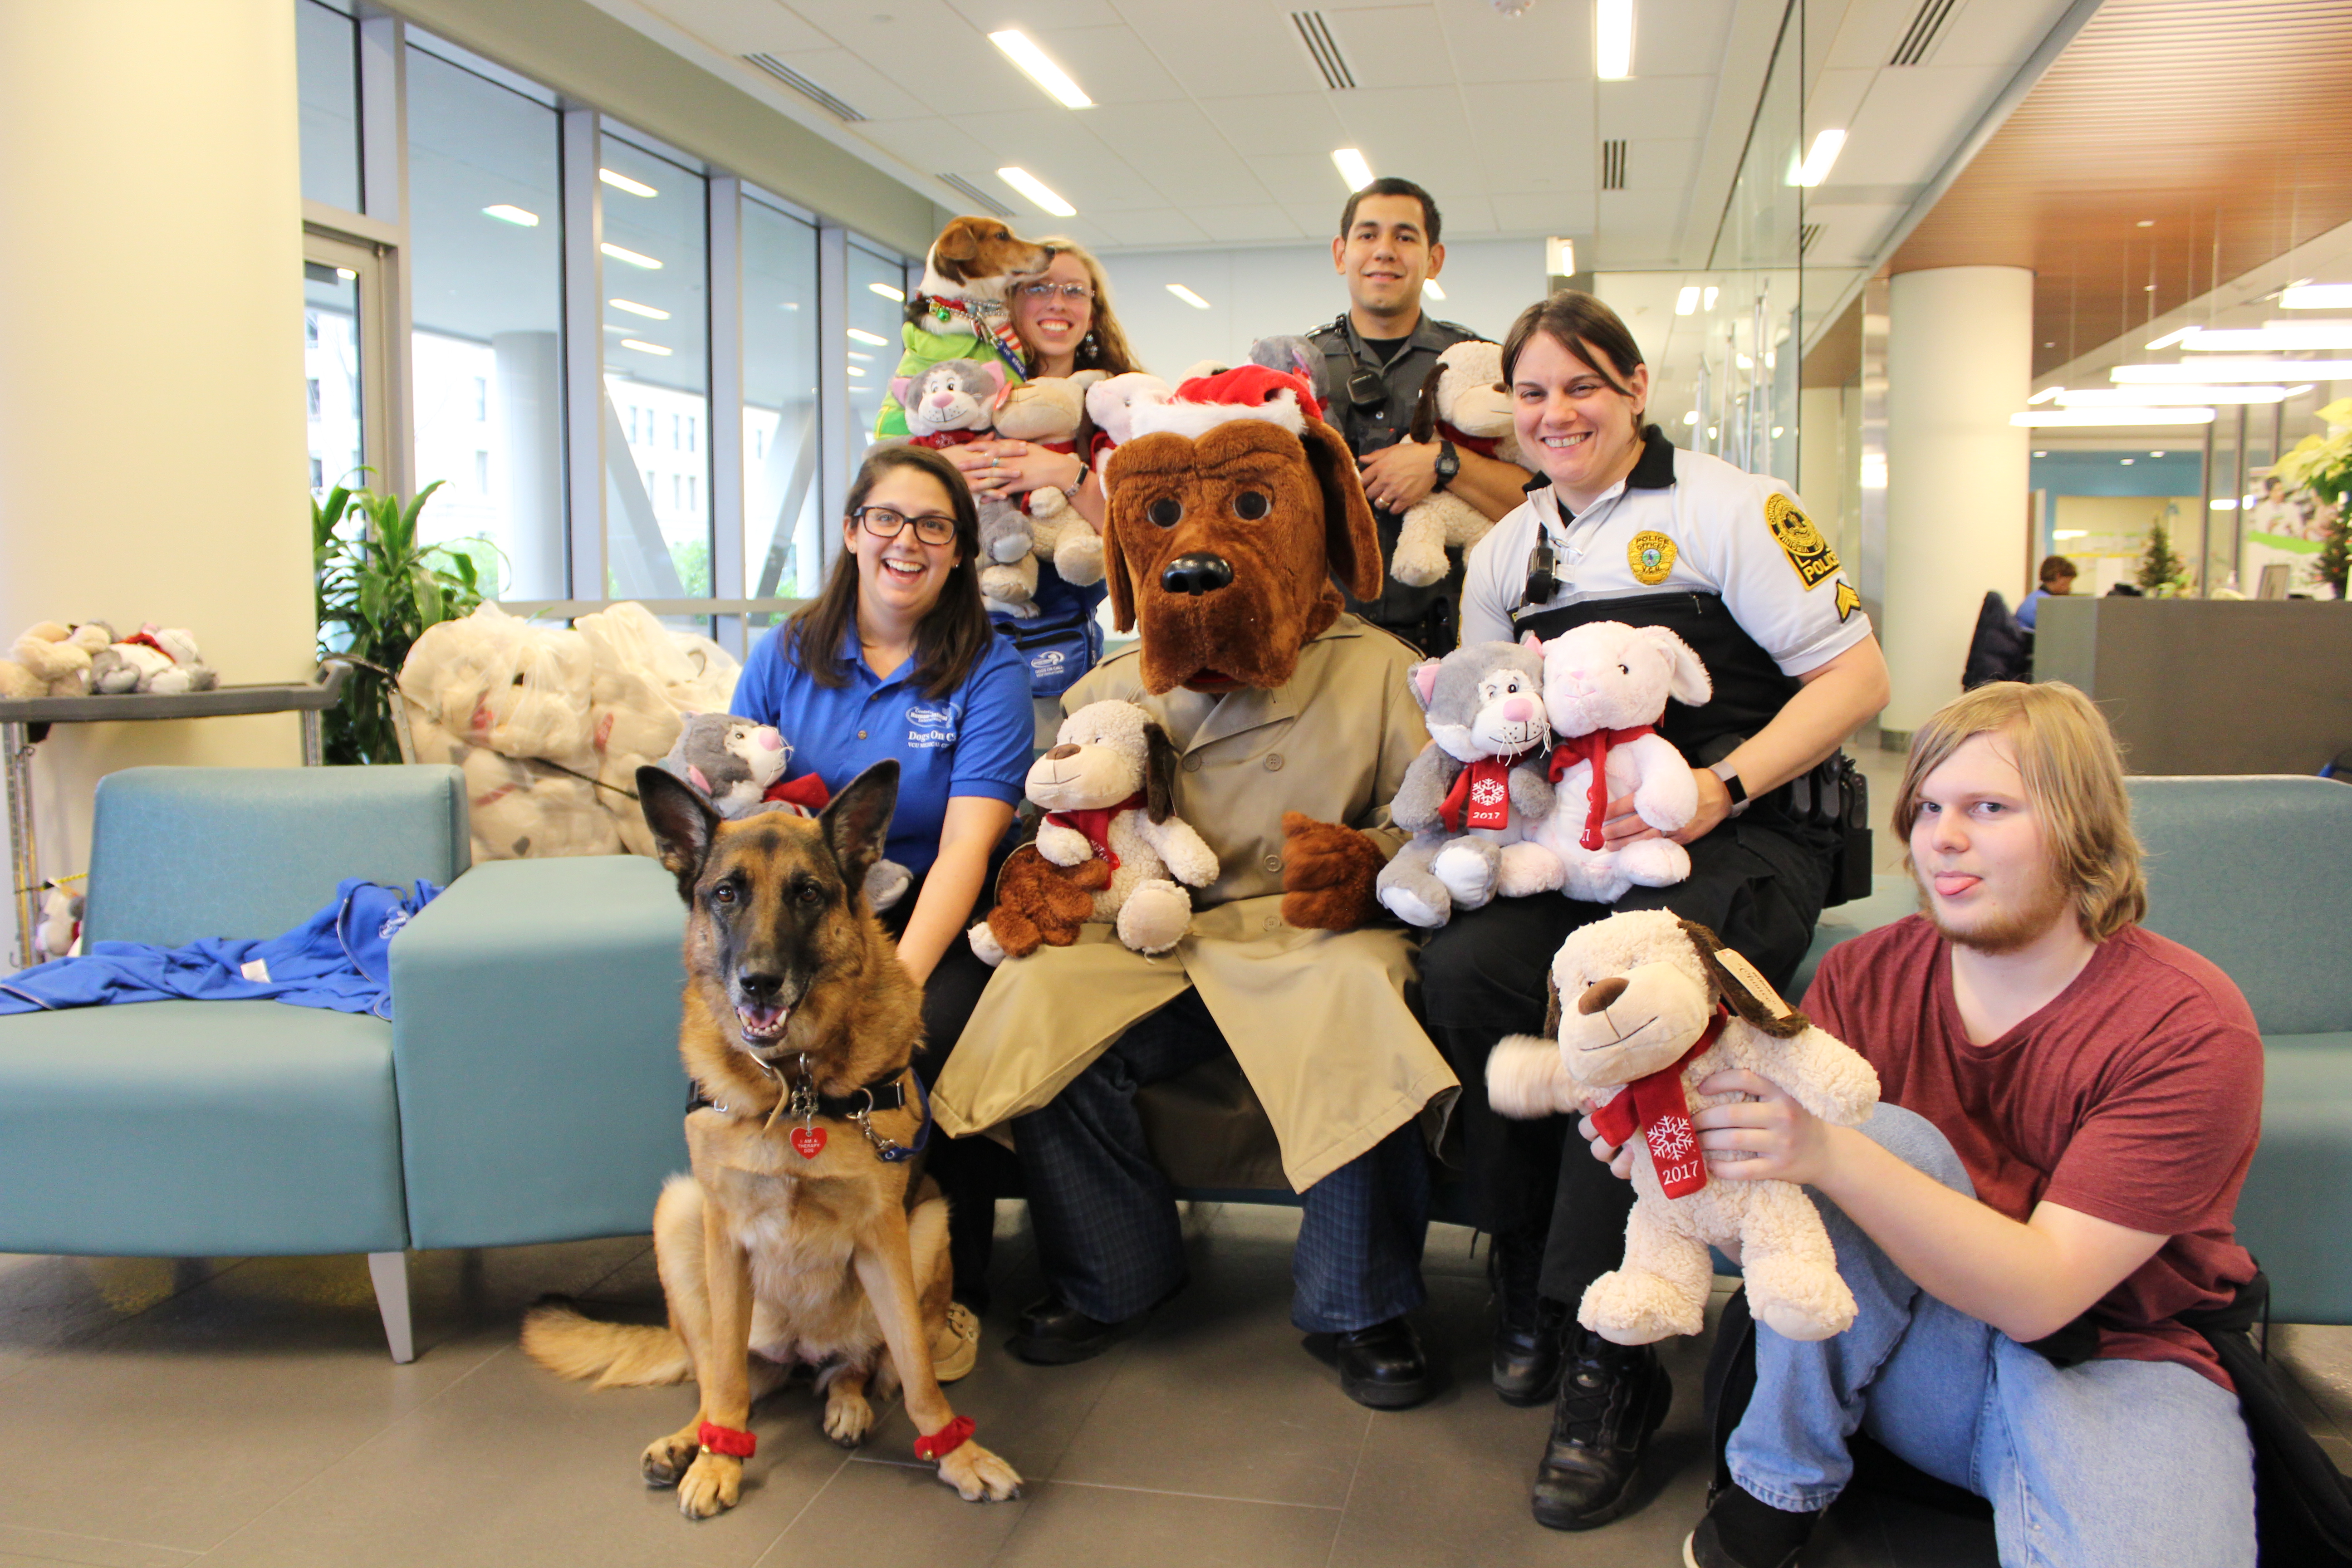 Therapy dogs Dahlia, a german shepherd, and Blake, a beagle mix, pose alongside McGruff - the costumed hound dog mascot for the V C U police - two police officers, their handlers and another friend who are all holding stuffed animals.